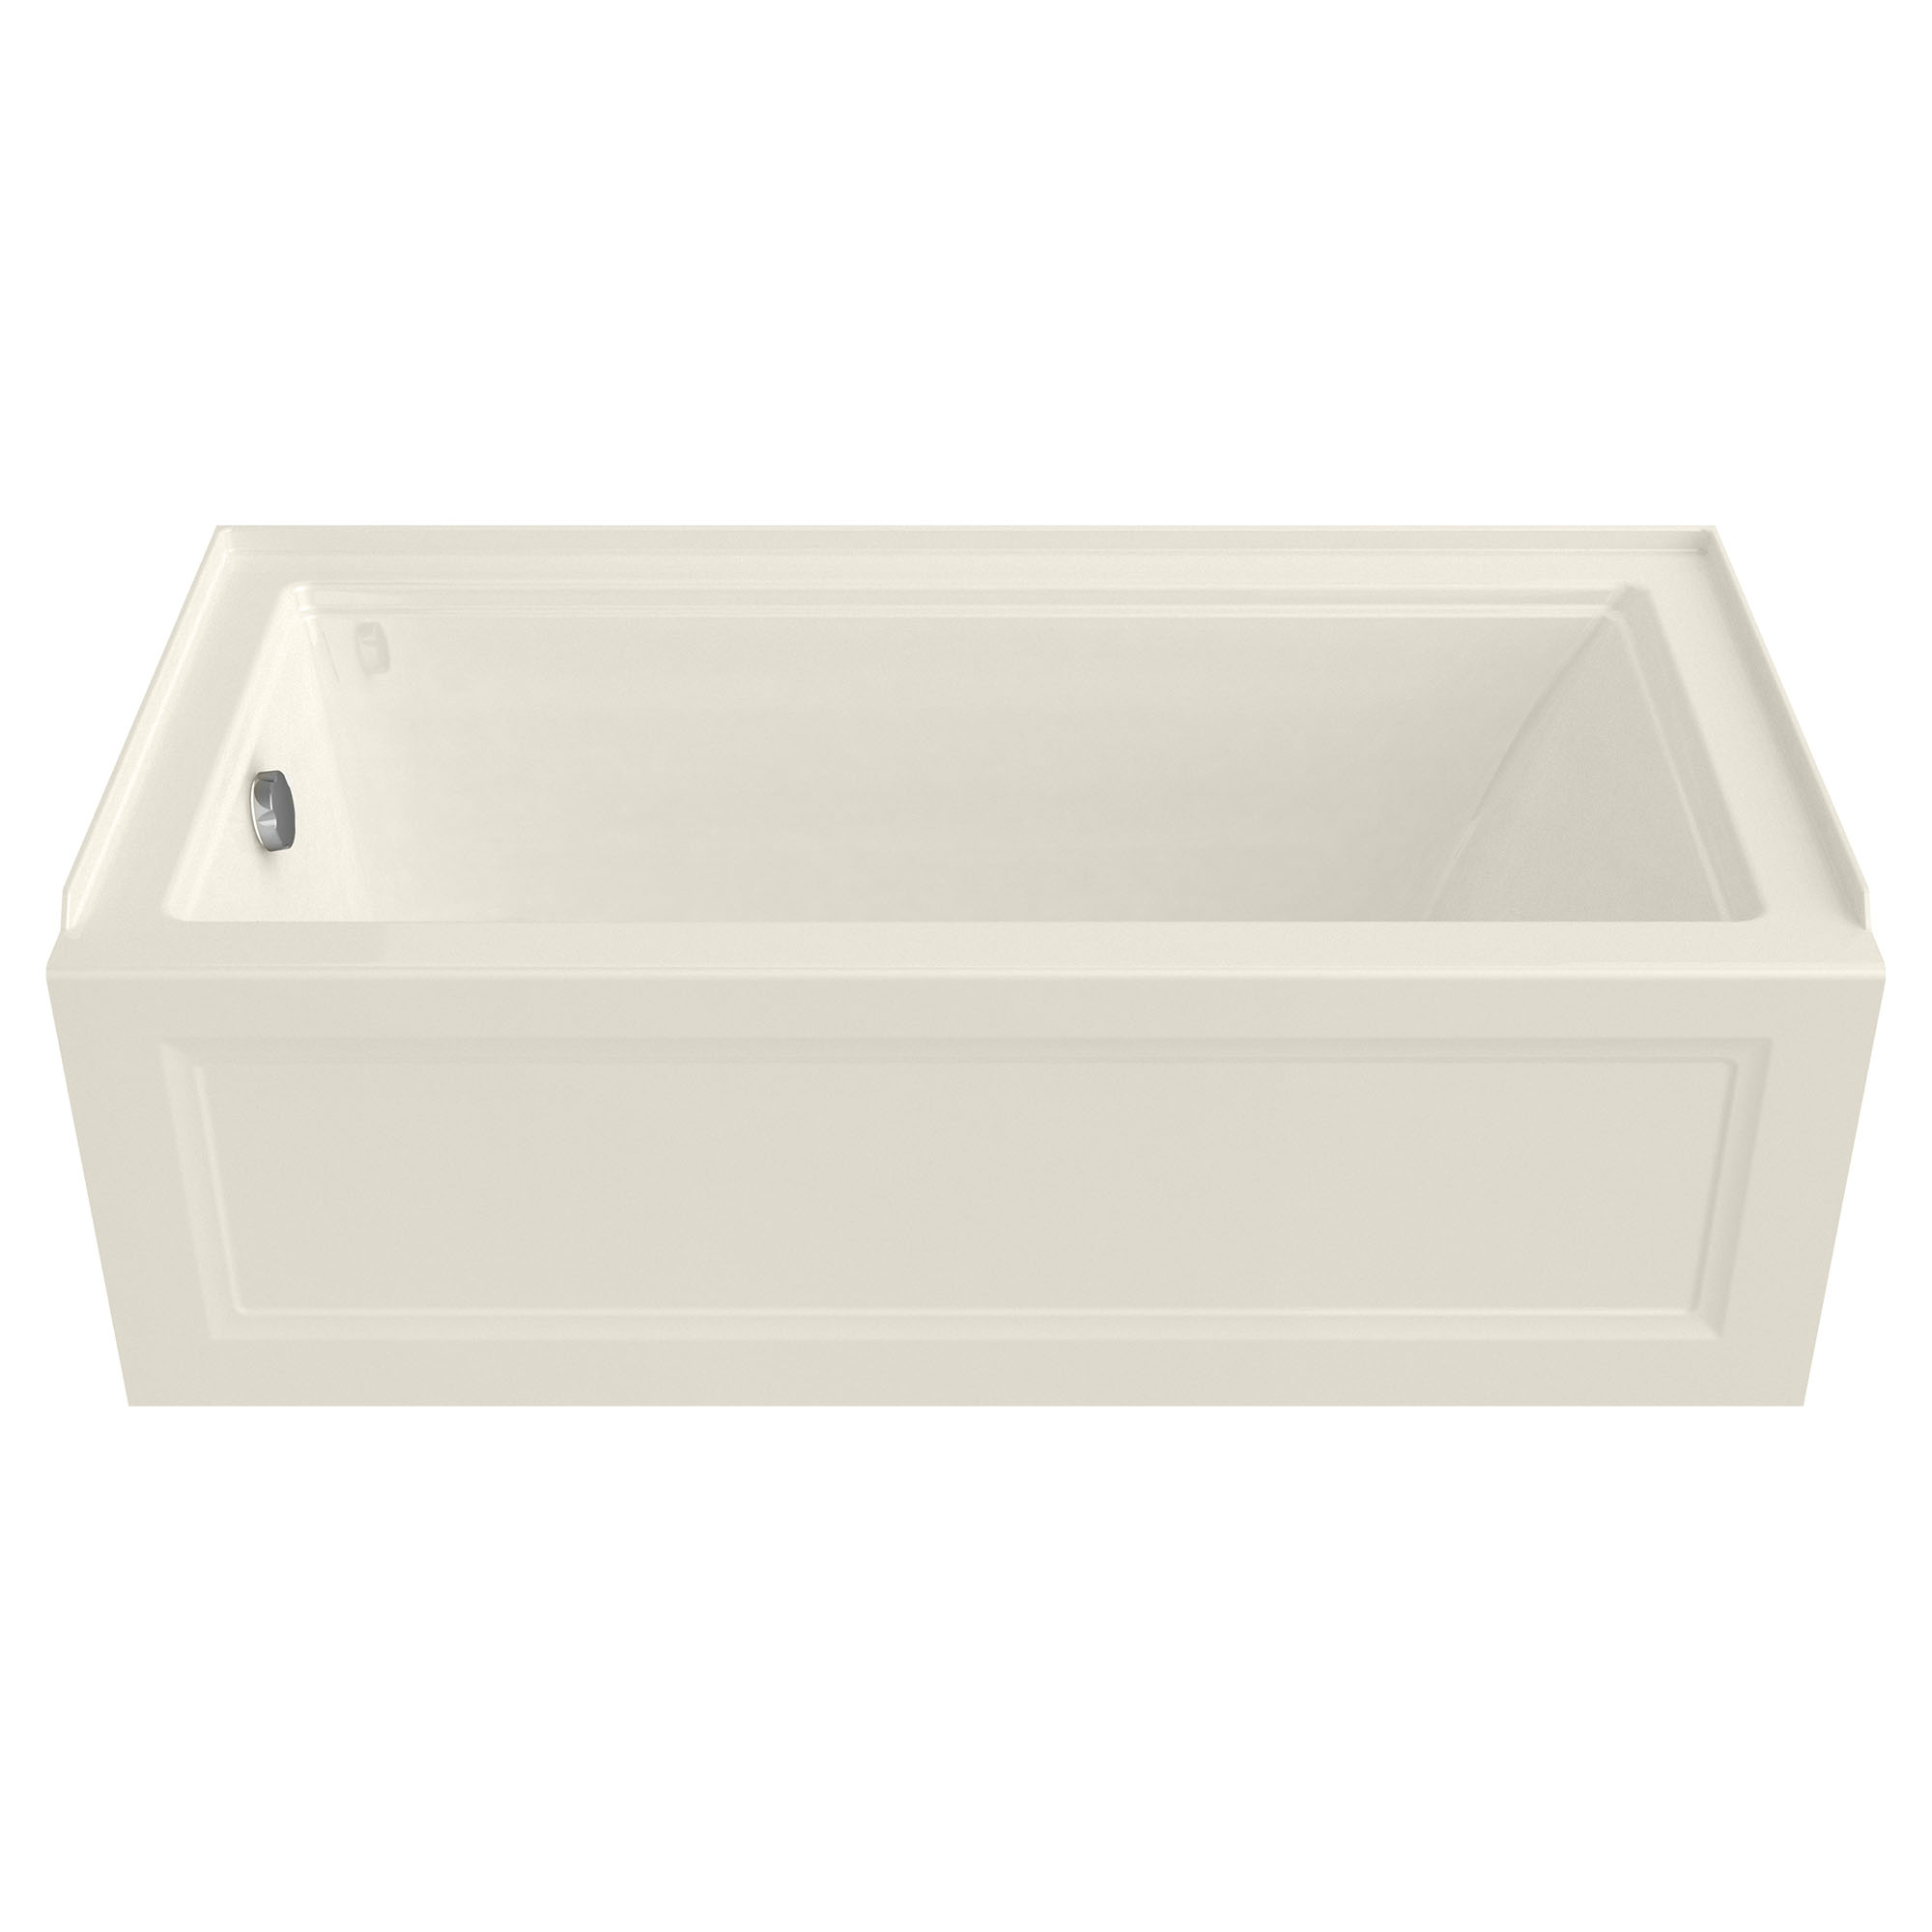 Town Square® S 60 x 30-Inch Integral Apron Bathtub With Left-Hand Outlet